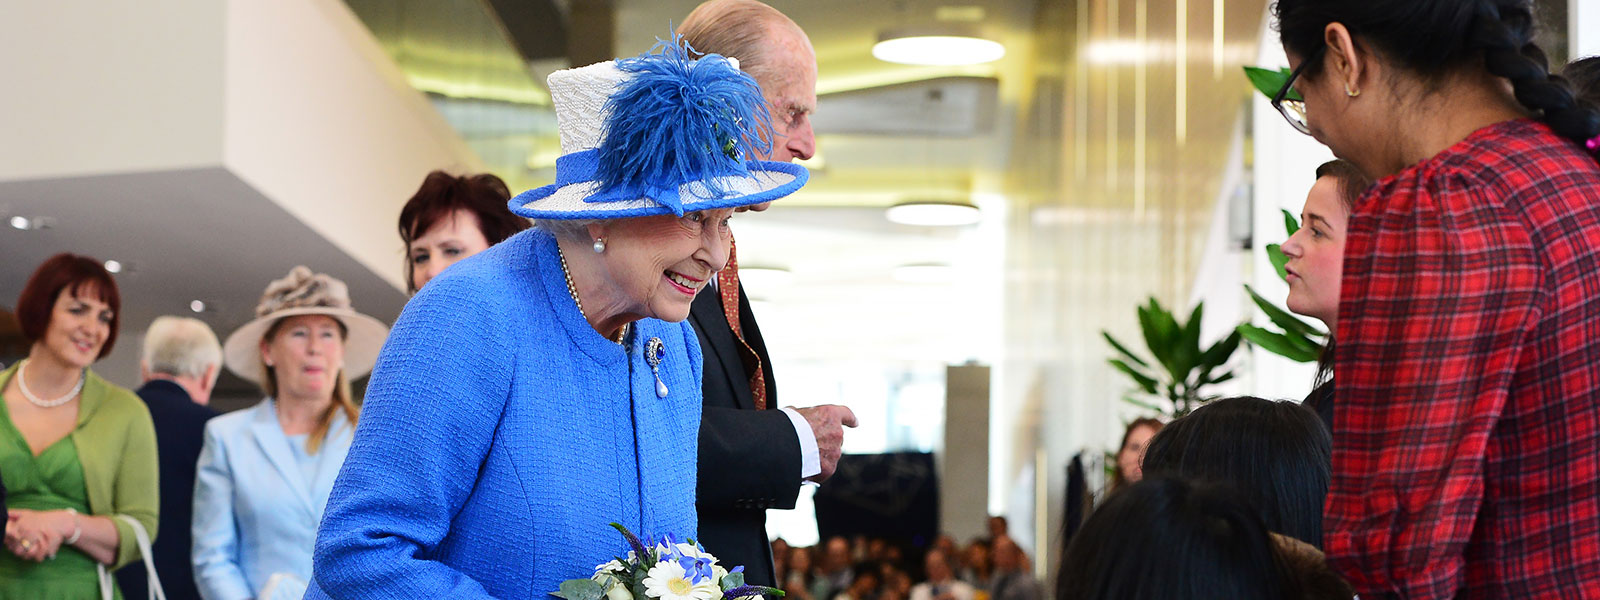 The Queen and the Duke of Edinburgh meet young people in the Technology & Innovation Centre